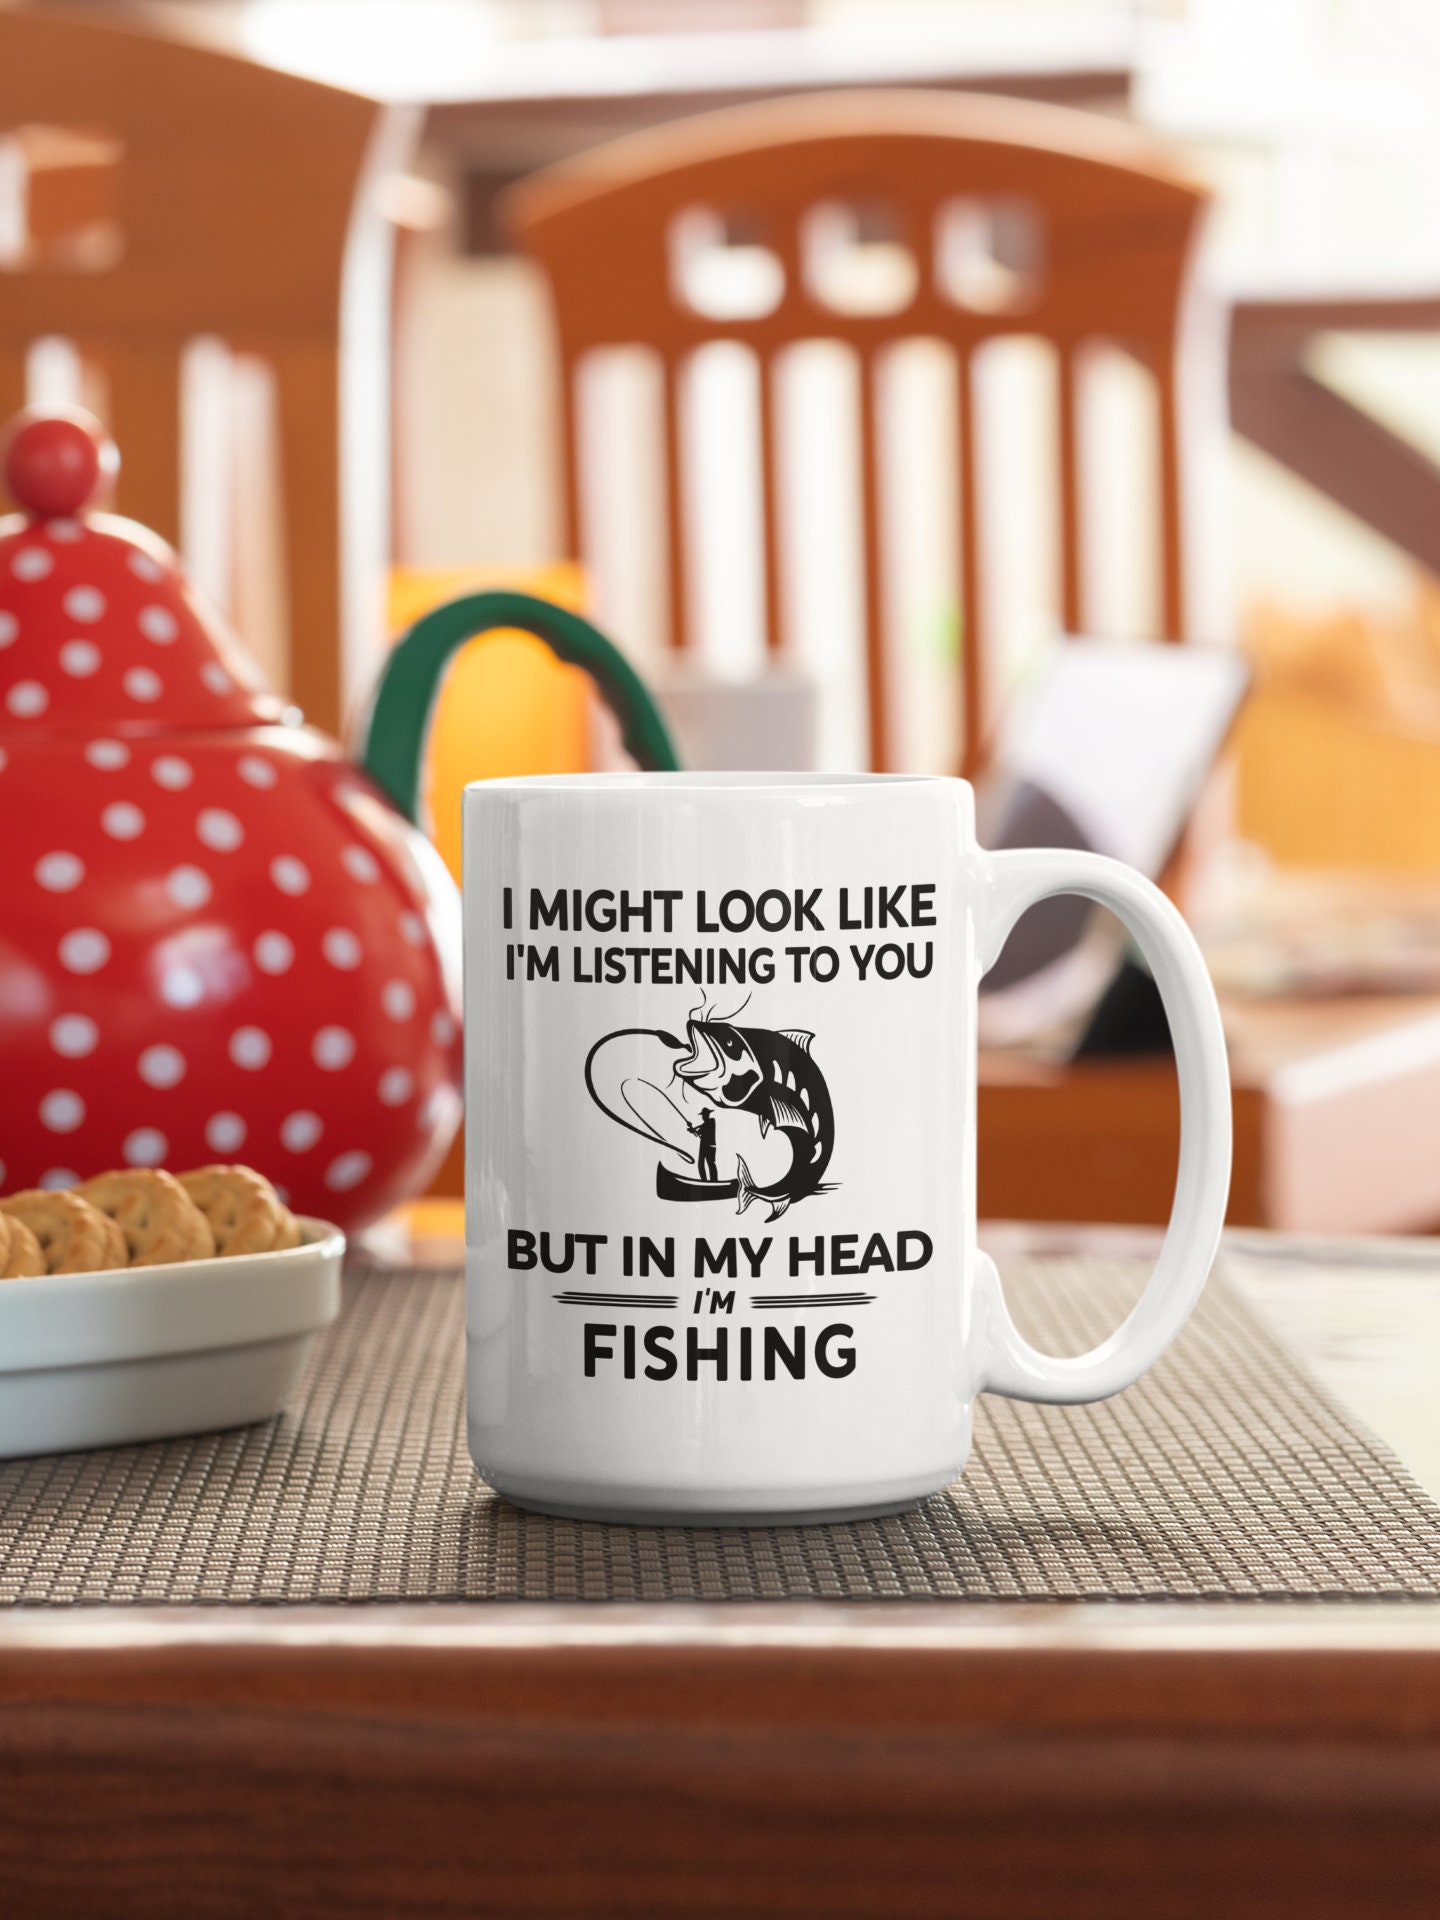 Fishing Mug, Fisherman Gift, I Might Look Like I'm Listening to You but In My Head I'm Fishing